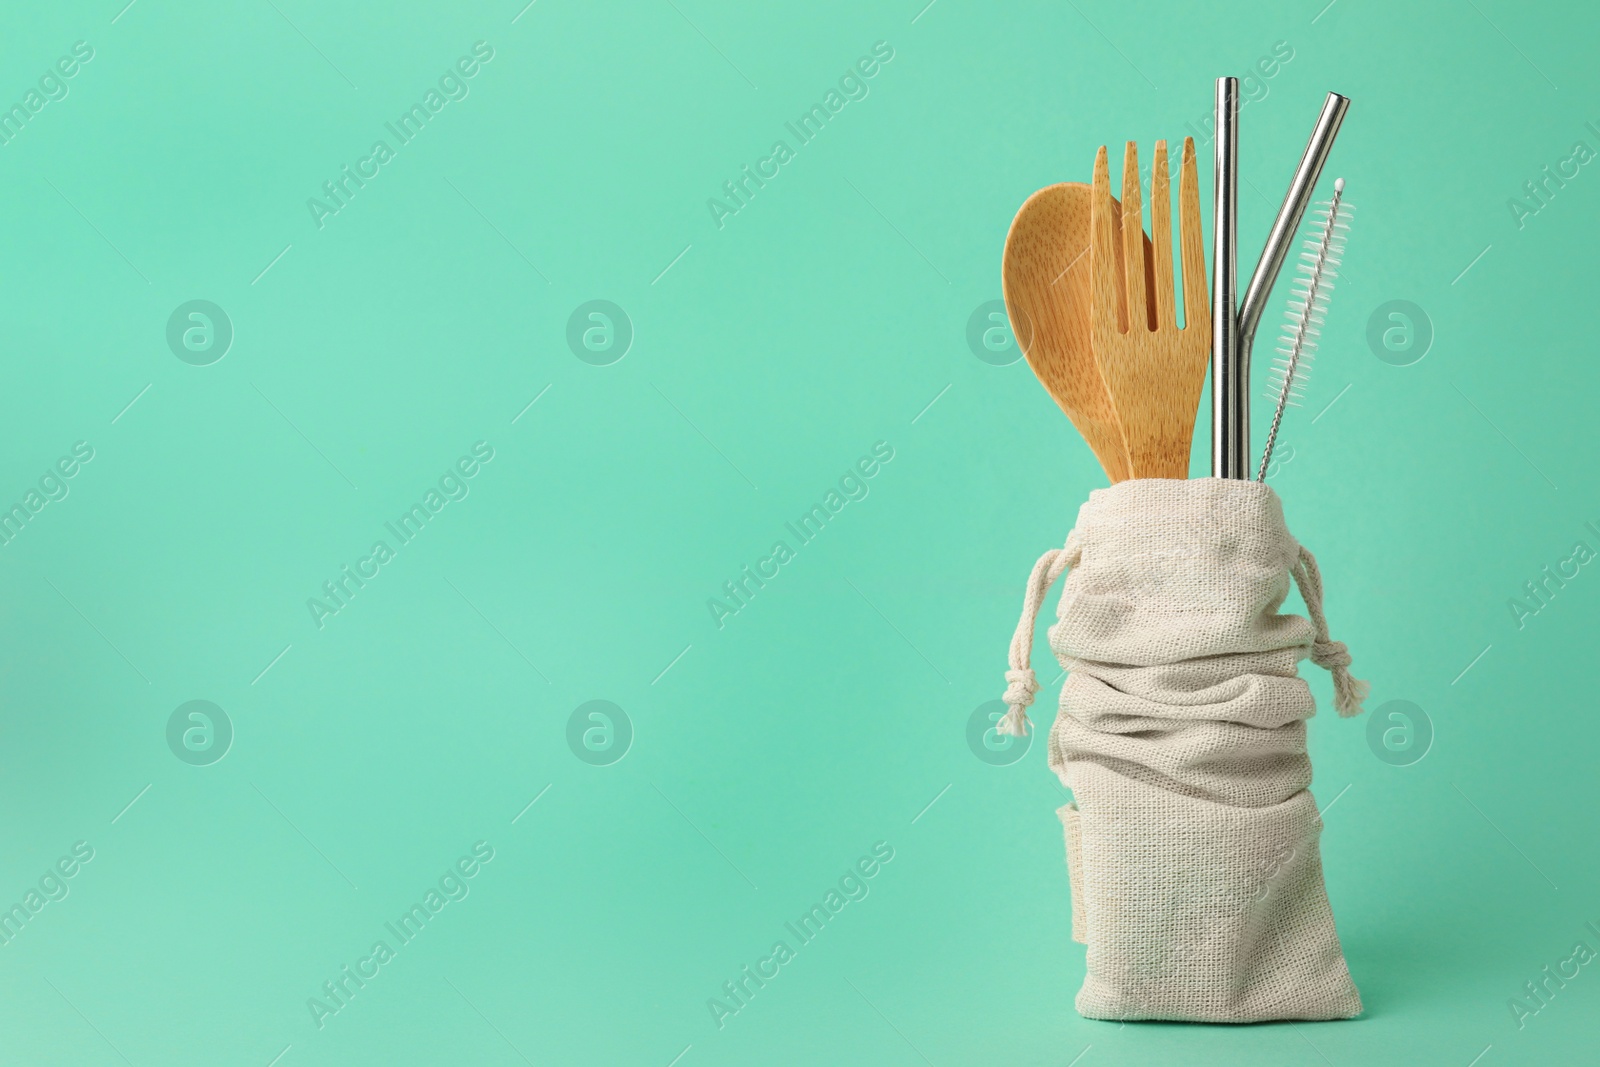 Photo of Bag with bamboo cutlery, metal straws and brush on turquoise background, space for text. Conscious consumption